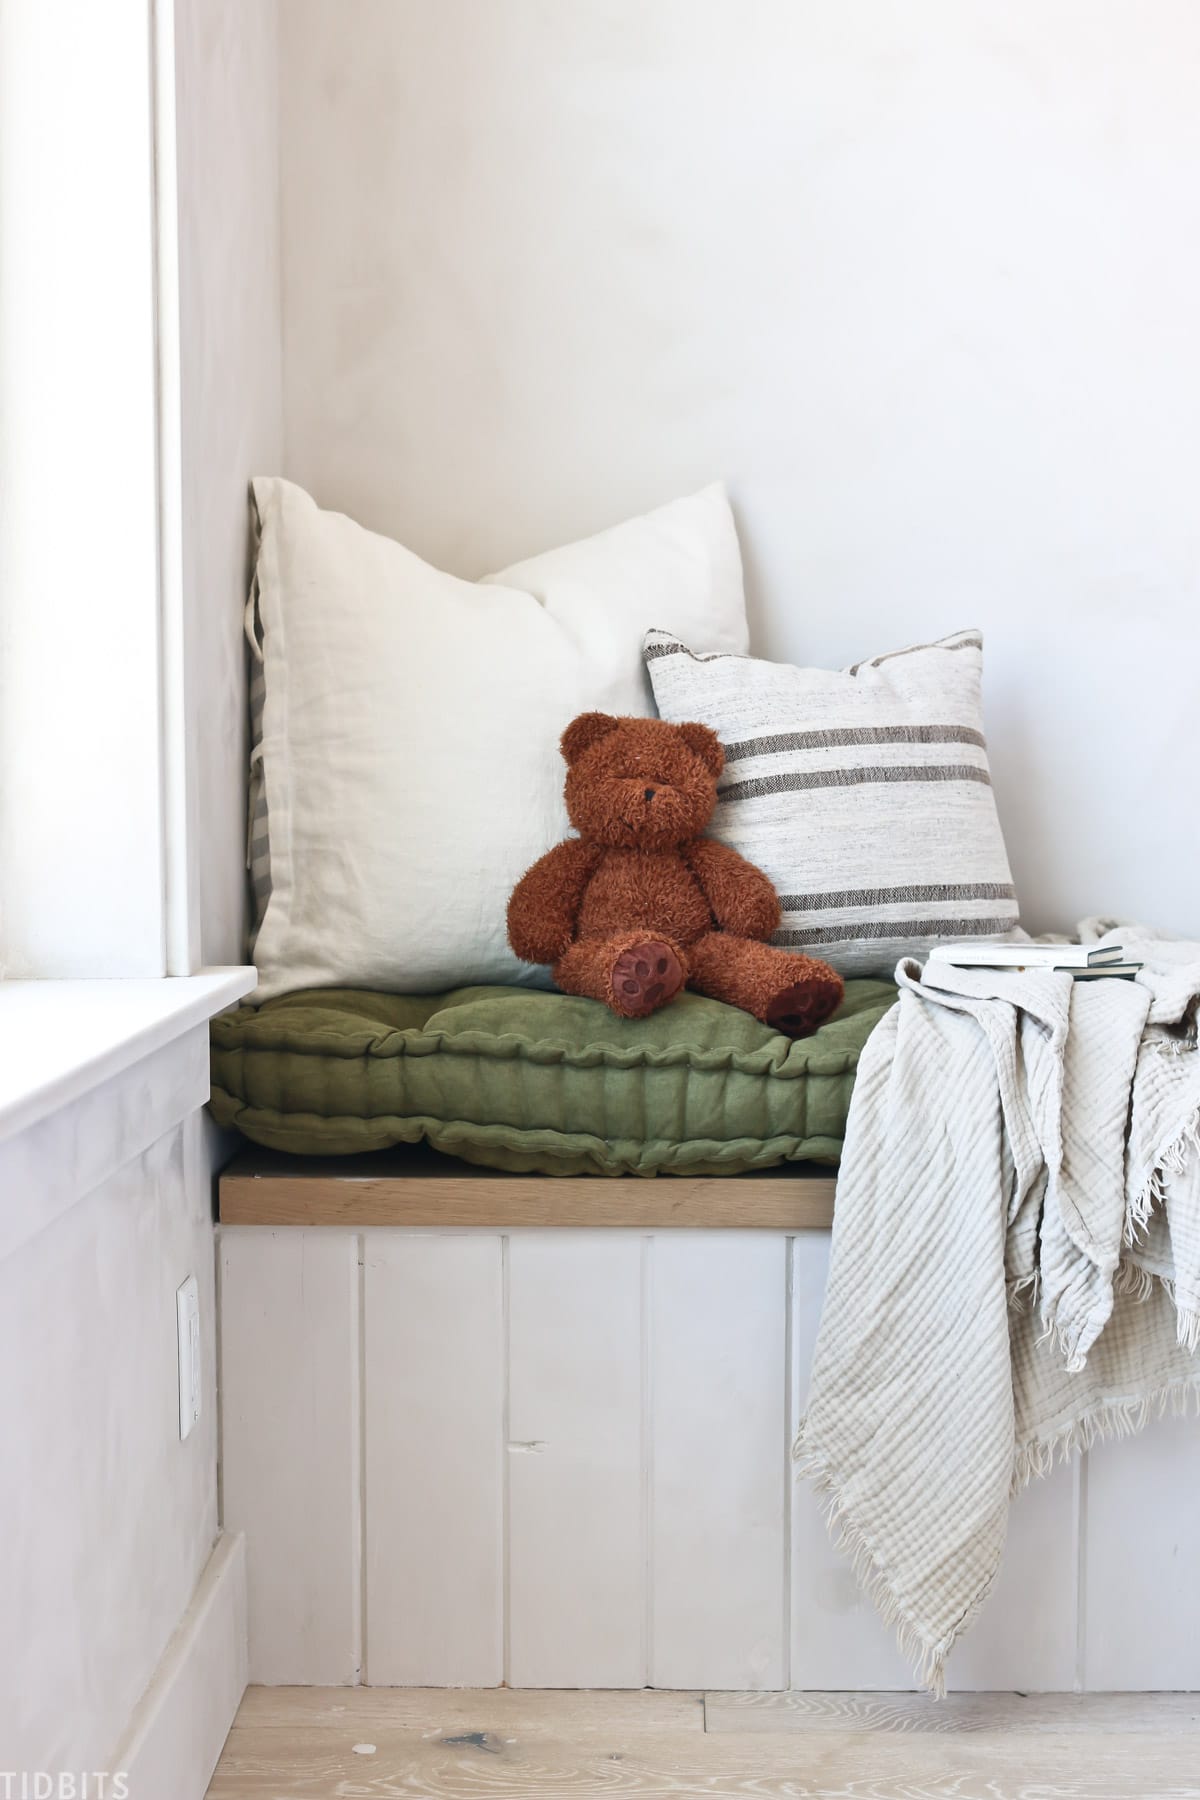 blanket hutch that has a teddy bear, pillows, and blanket on top of a bench cushion